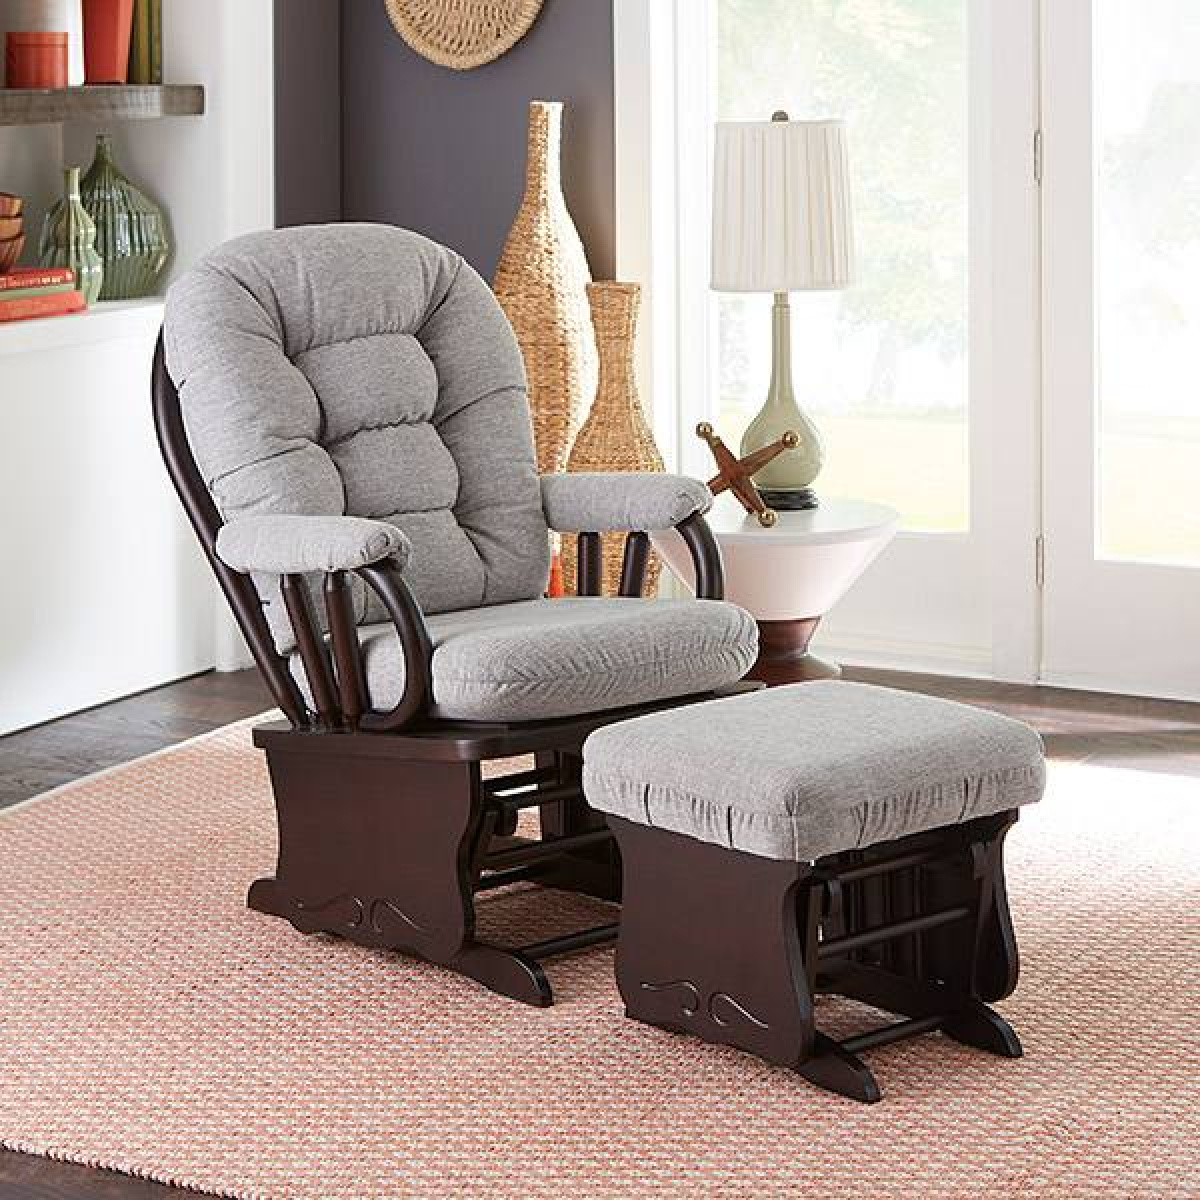 Swivel and glider chairs . +110 Unique Living Room Furniture Pieces That Amaze Everyone - 42